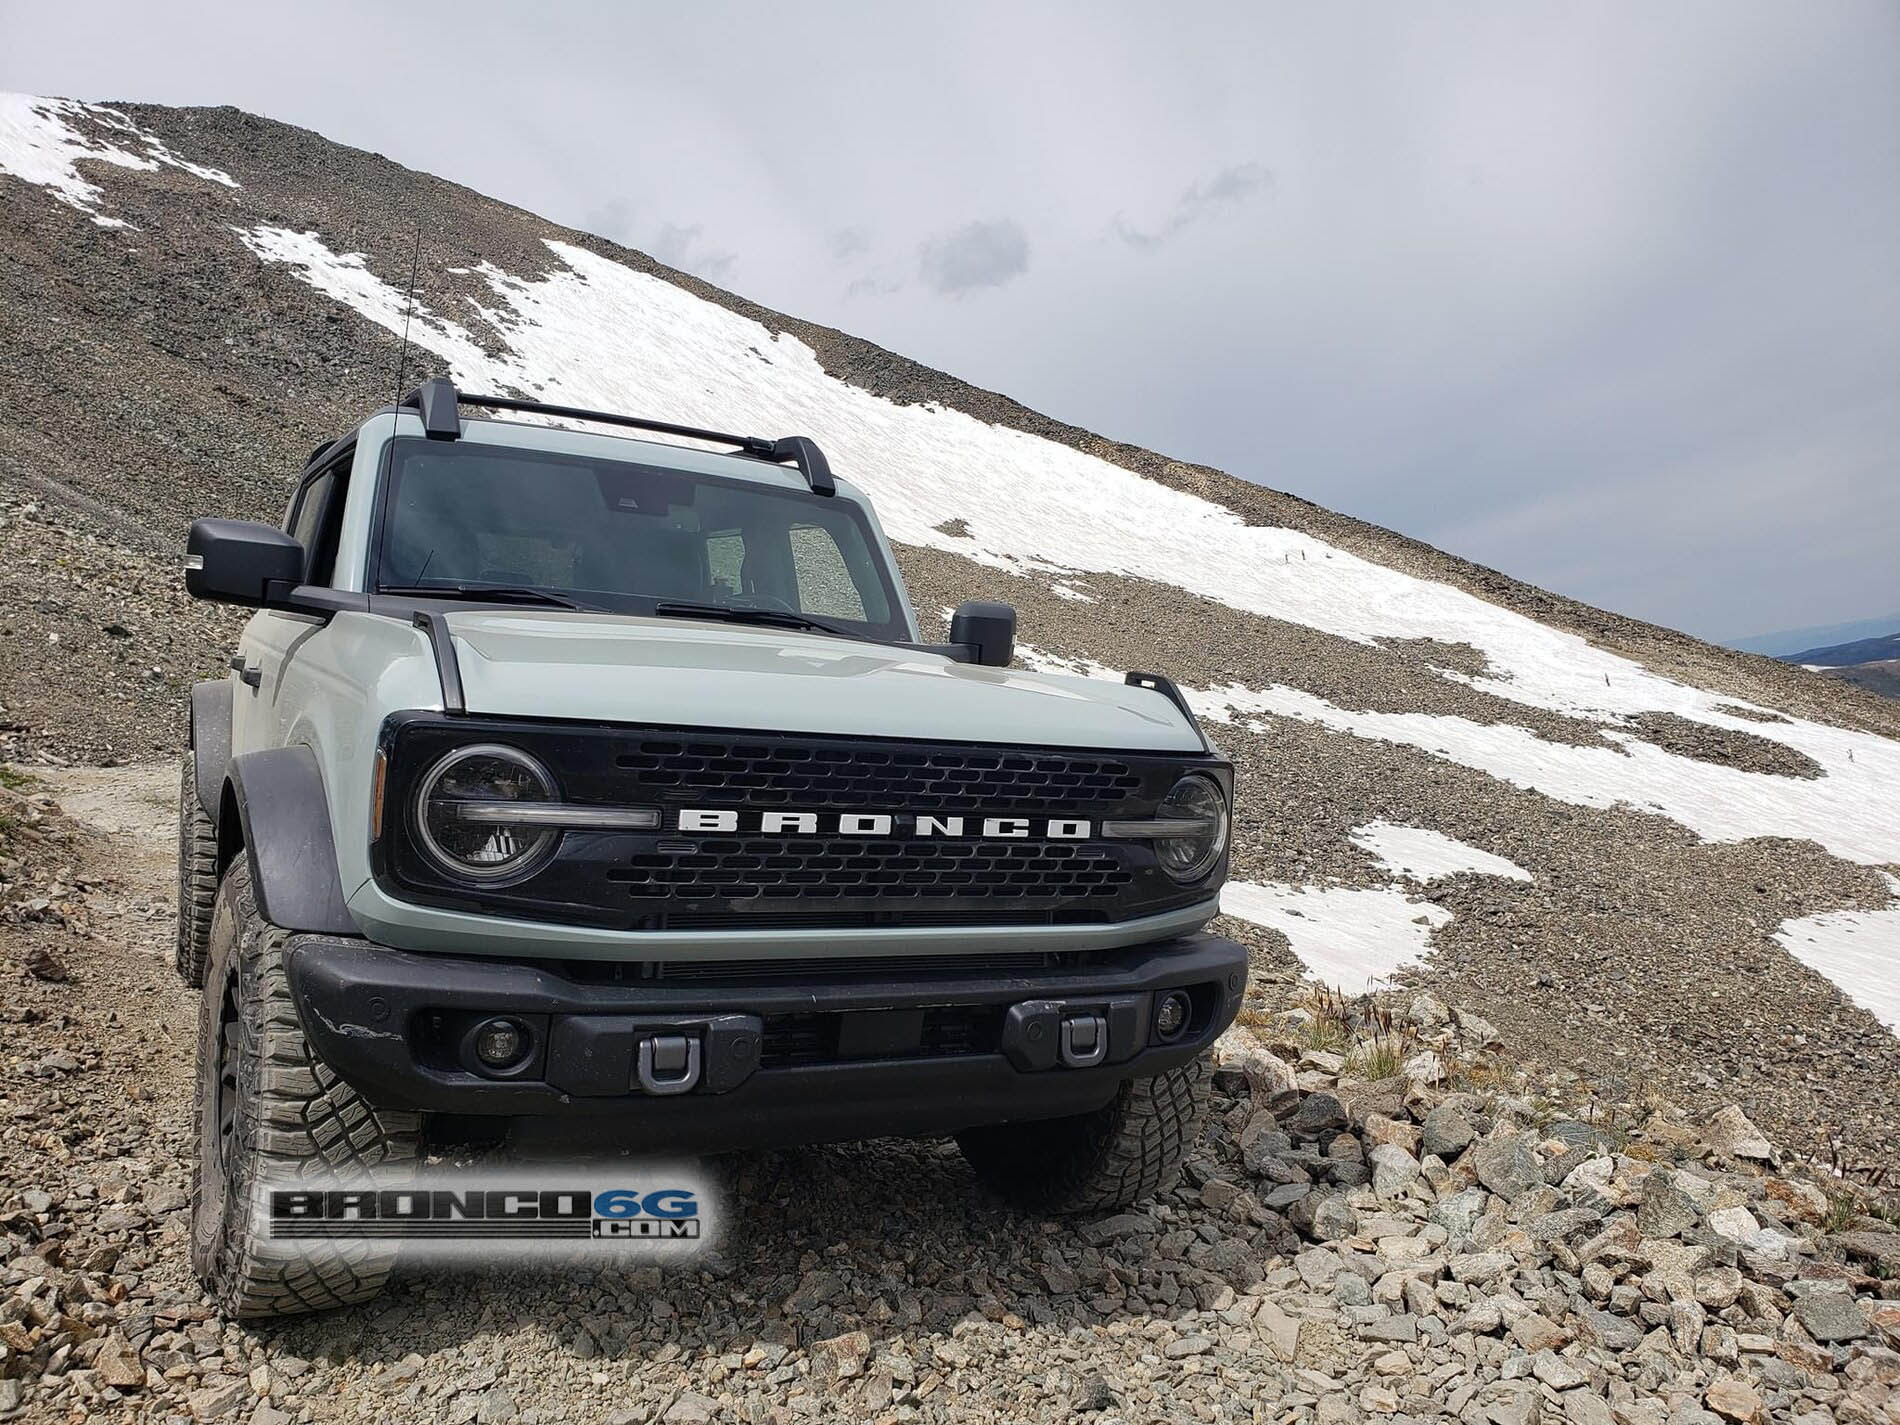 Ford Bronco Spotted: Cactus Gray and Black Broncos testing in Colorado mountains 1595478592774